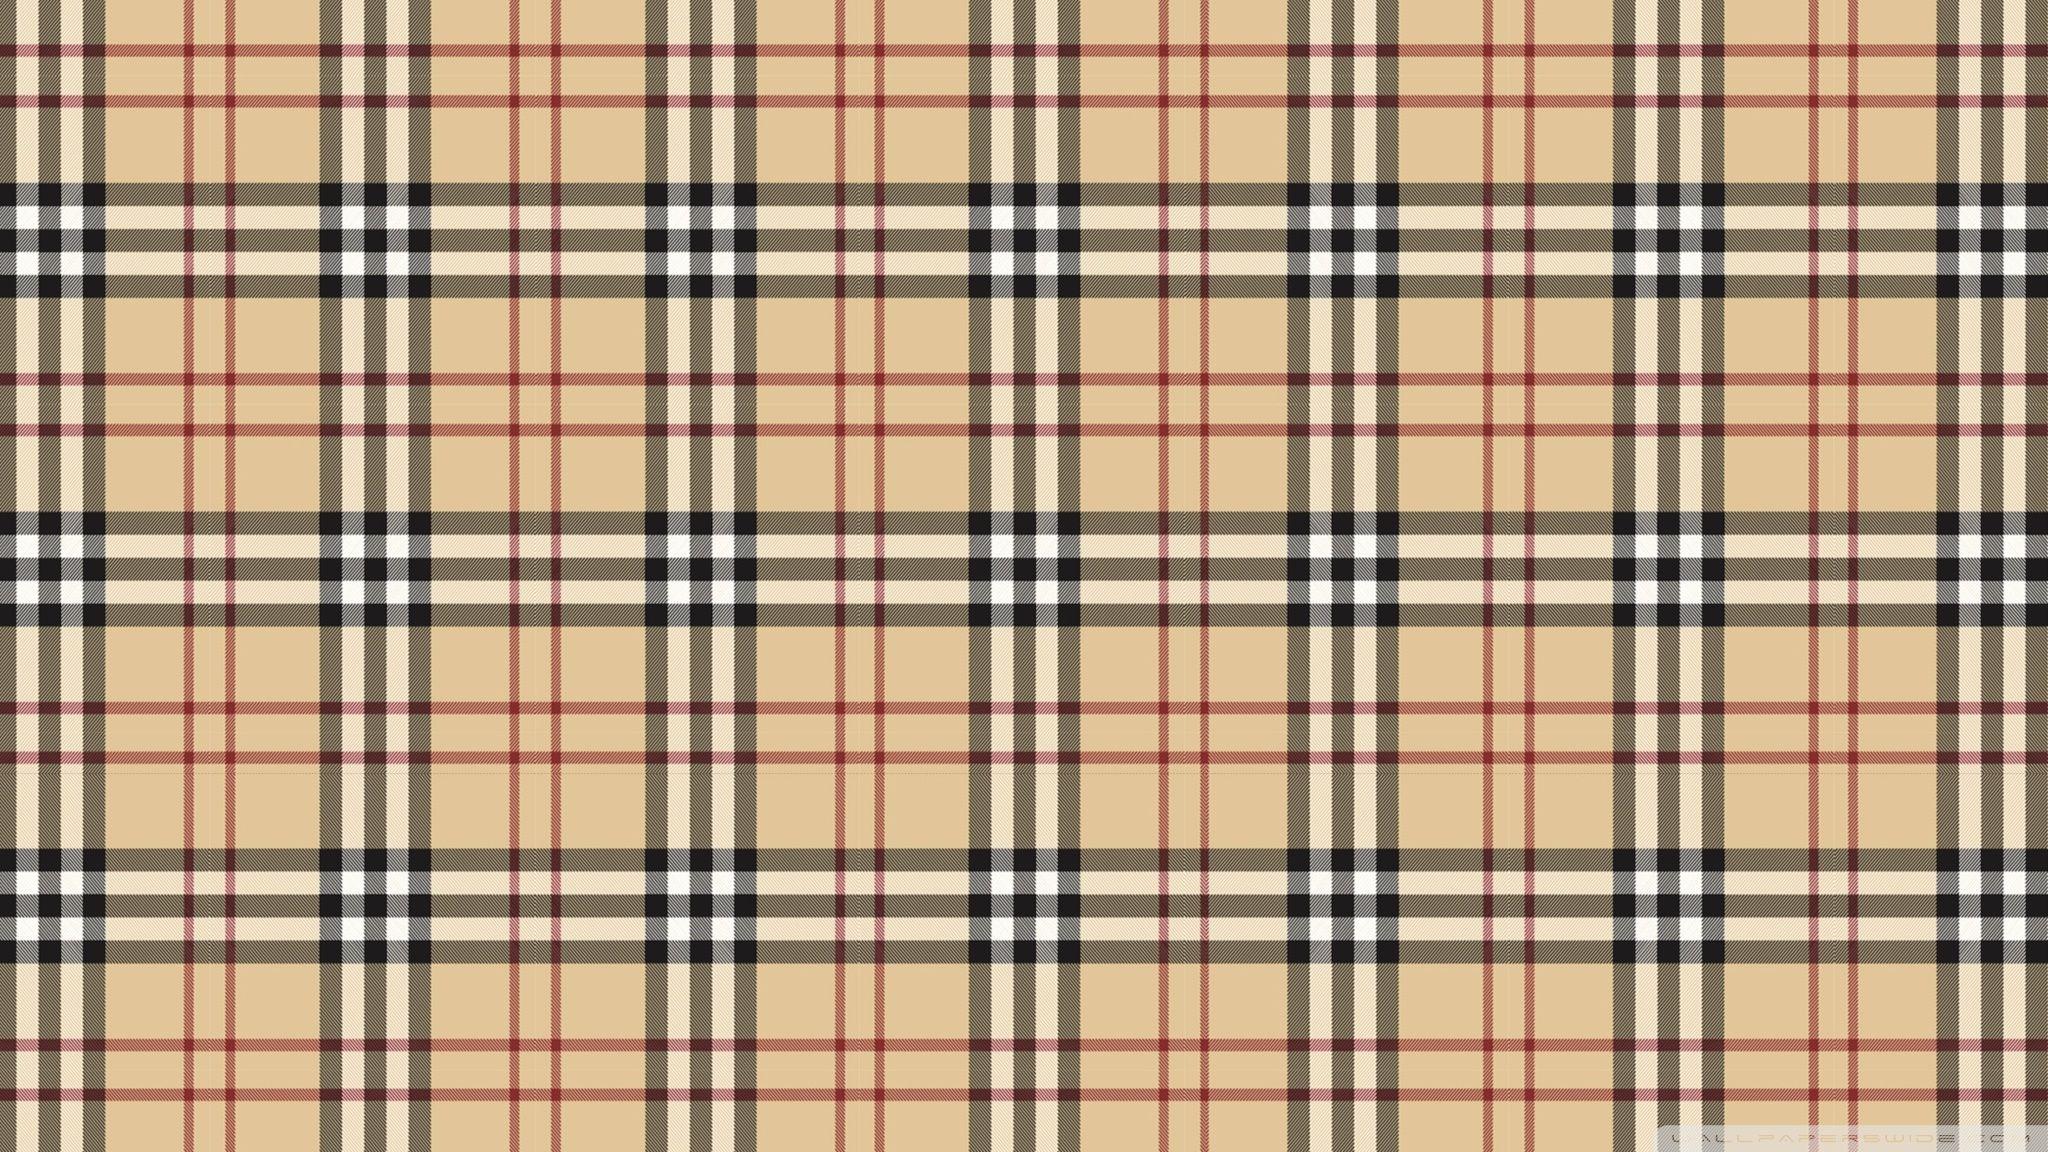 Plaid wallpapers  Peel and Stick or NonPasted  Save 25